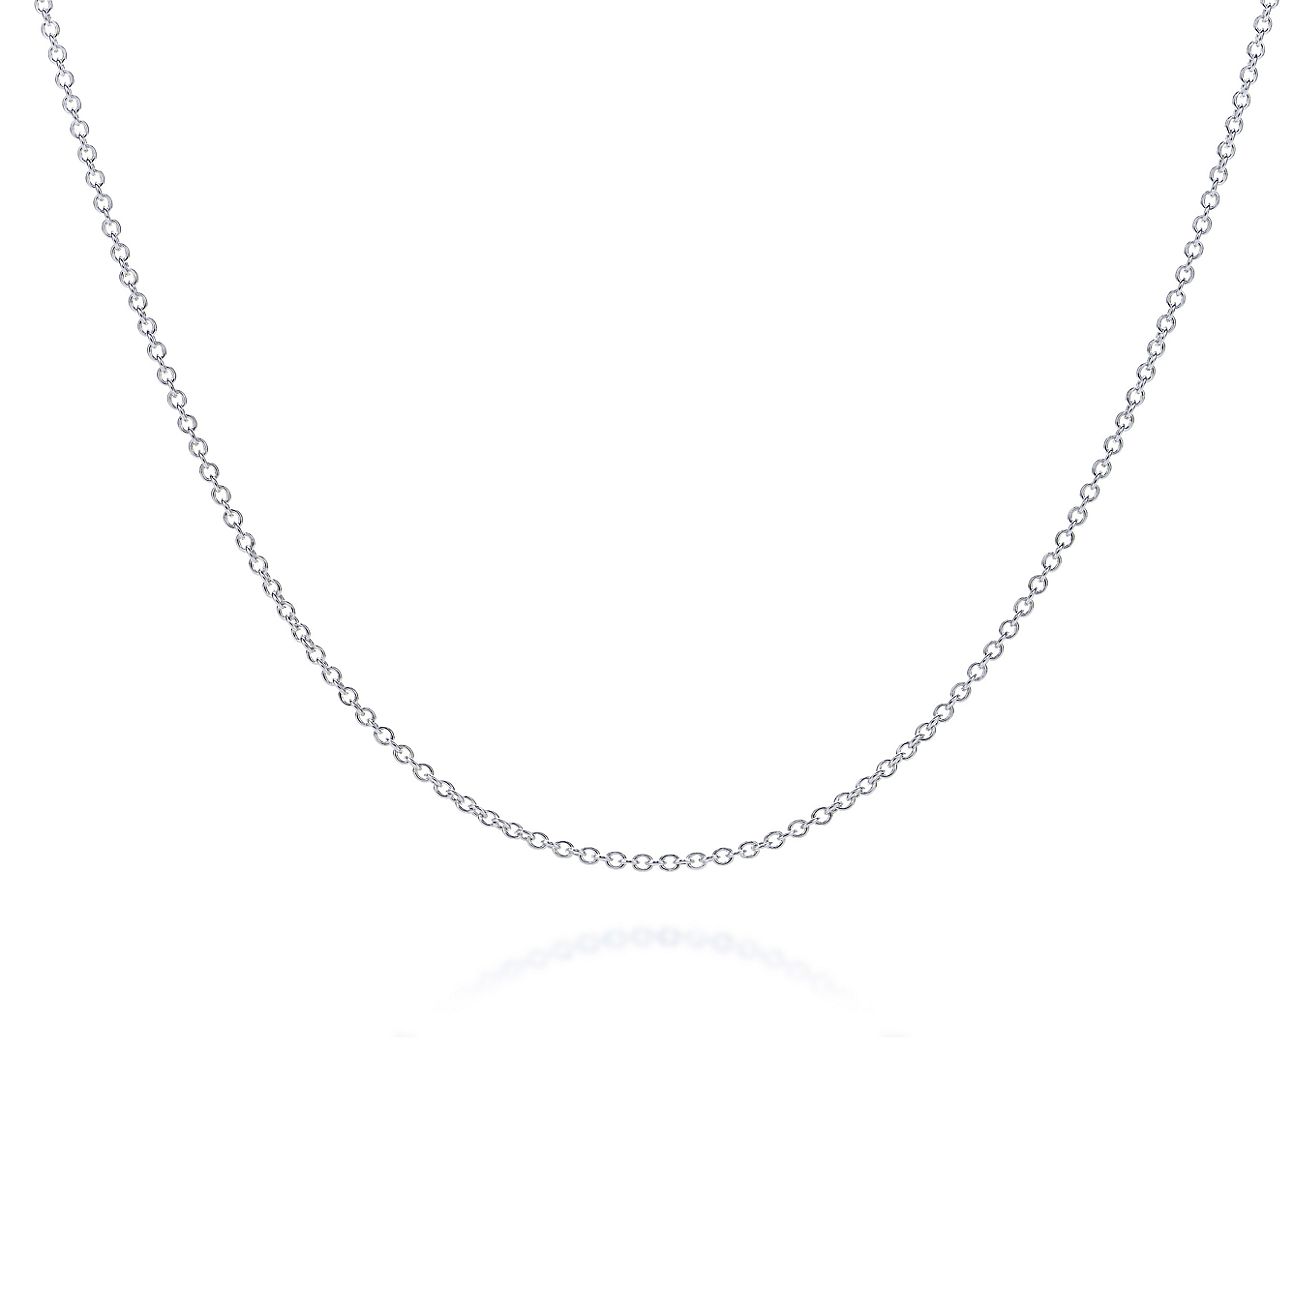 tiffany and co necklace sterling silver